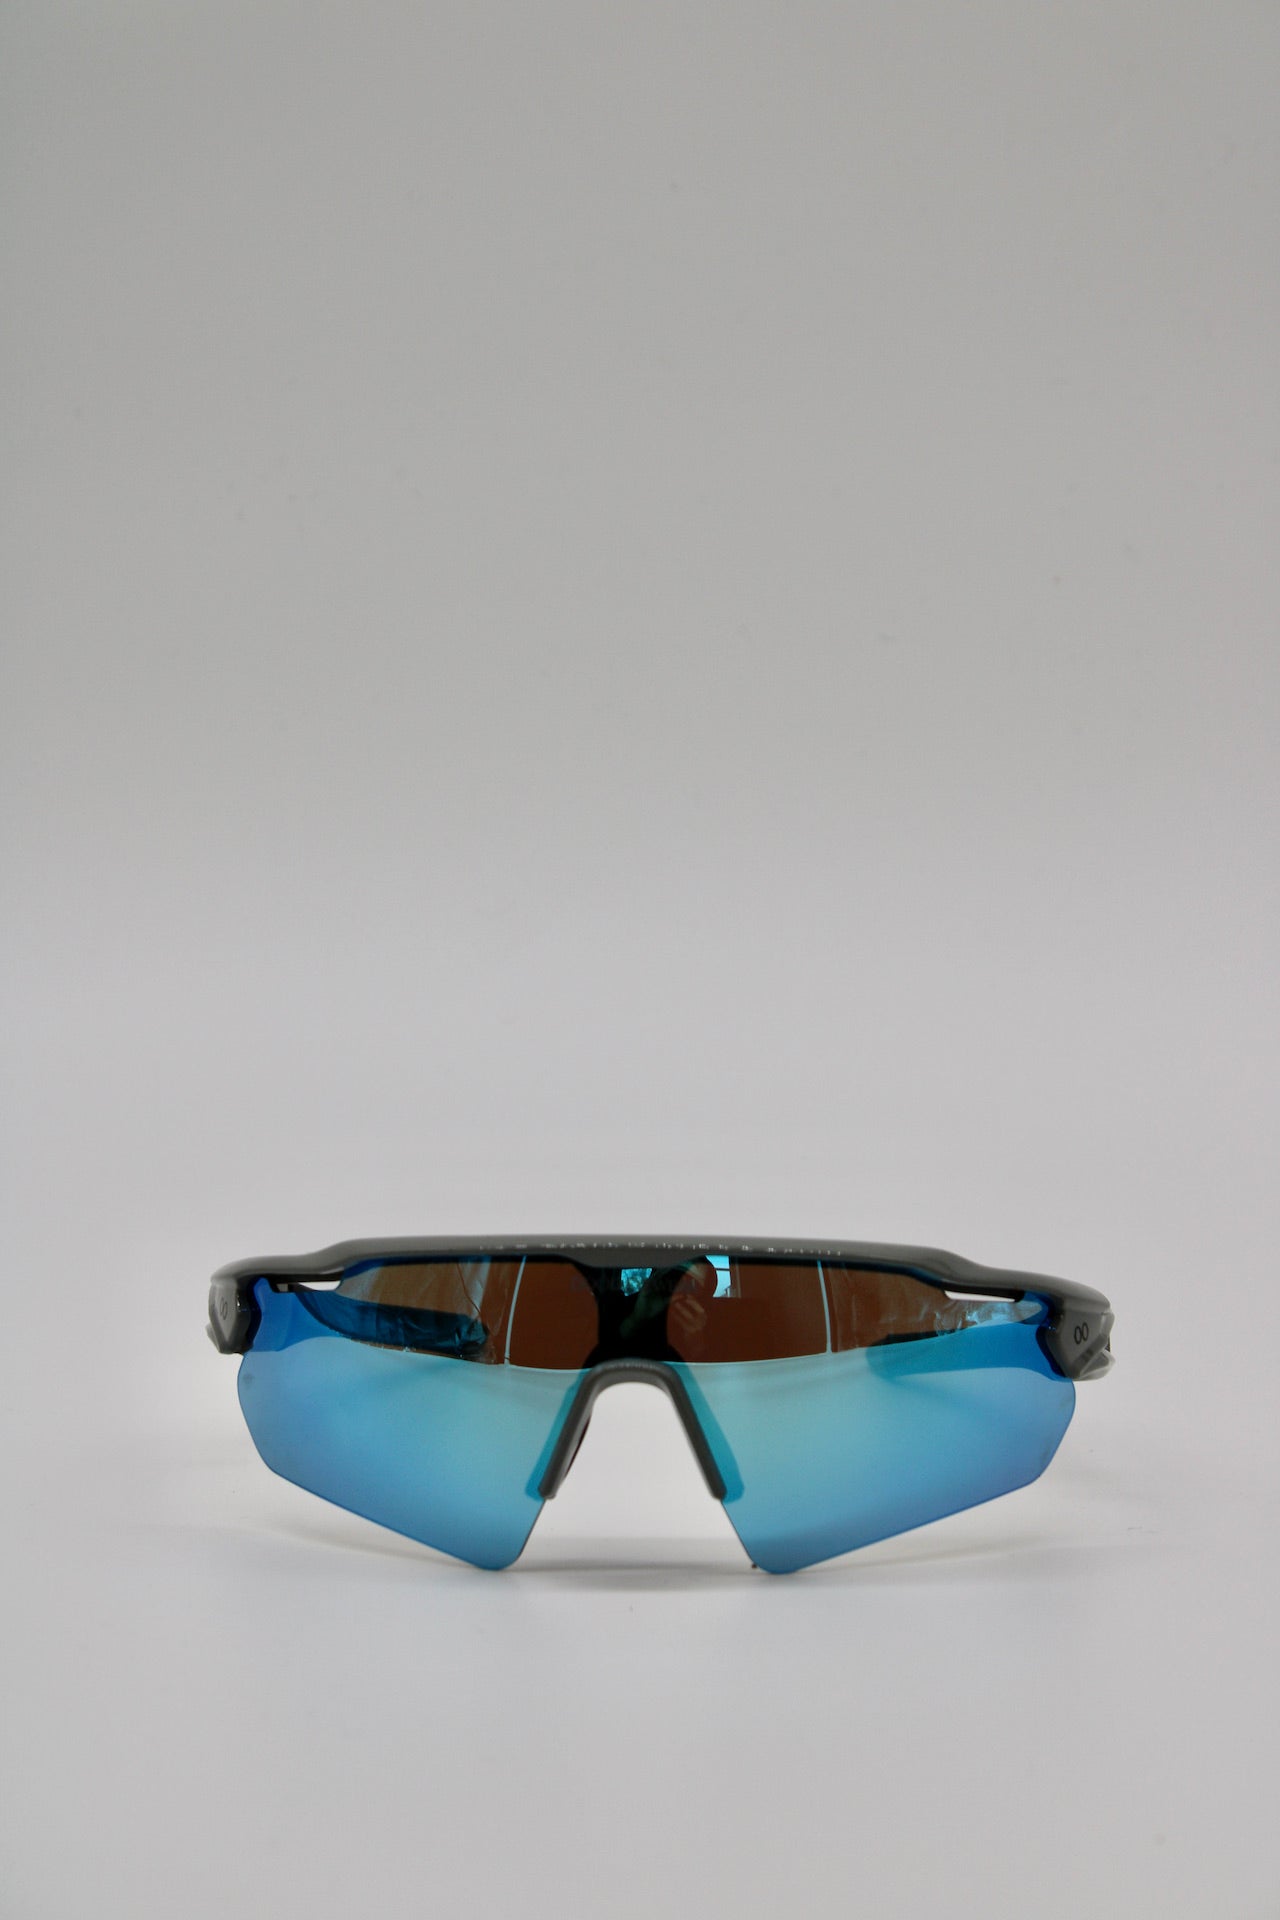 LIMITED EDITION: 516 Escapist Grey Frame with Black Detail and Three Lenses